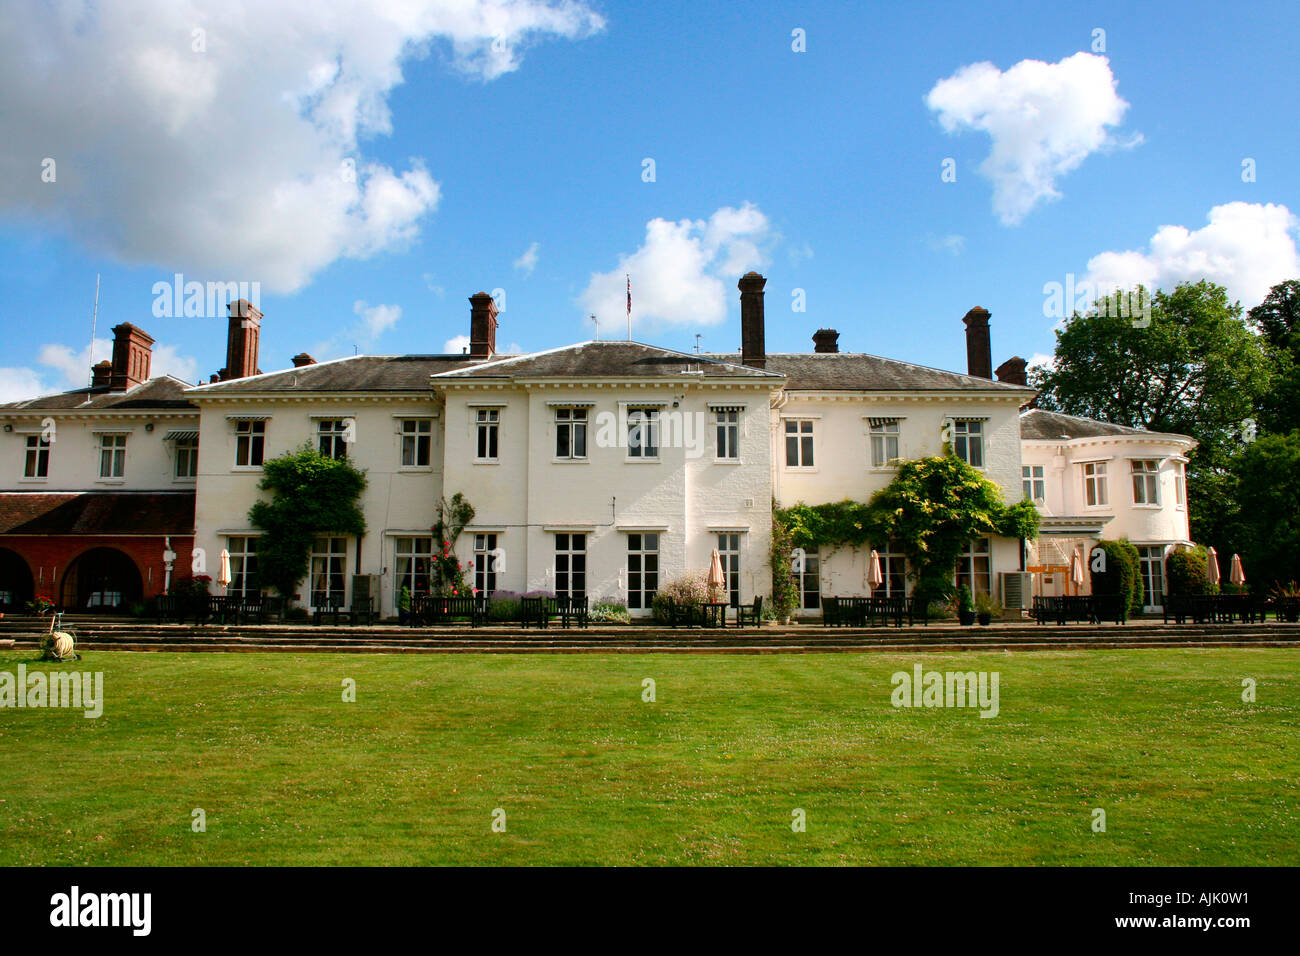 One of the Verve venues, The milton hill house in Oxfordshire, UK. Stock Photo